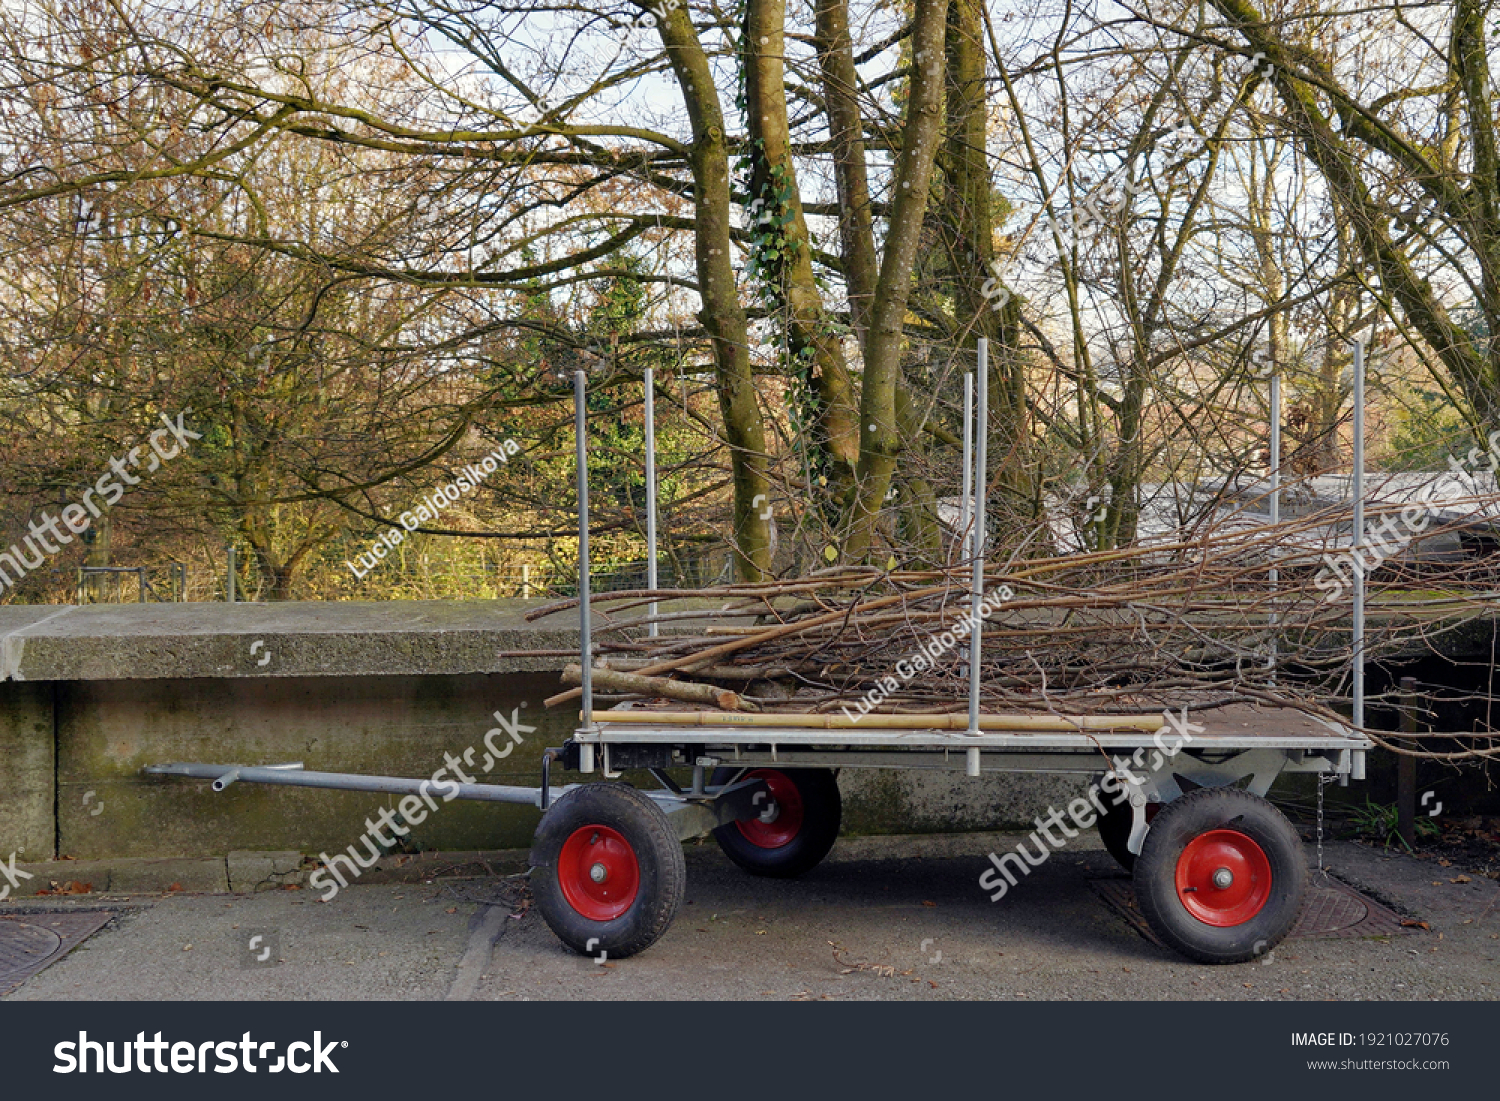 Handcart of wheelbarrow loaded with tree branches and twigs removed from the  trees in garden work in the spring. The plant waste is neatly arranged on the cart with rubber wheels. #1921027076